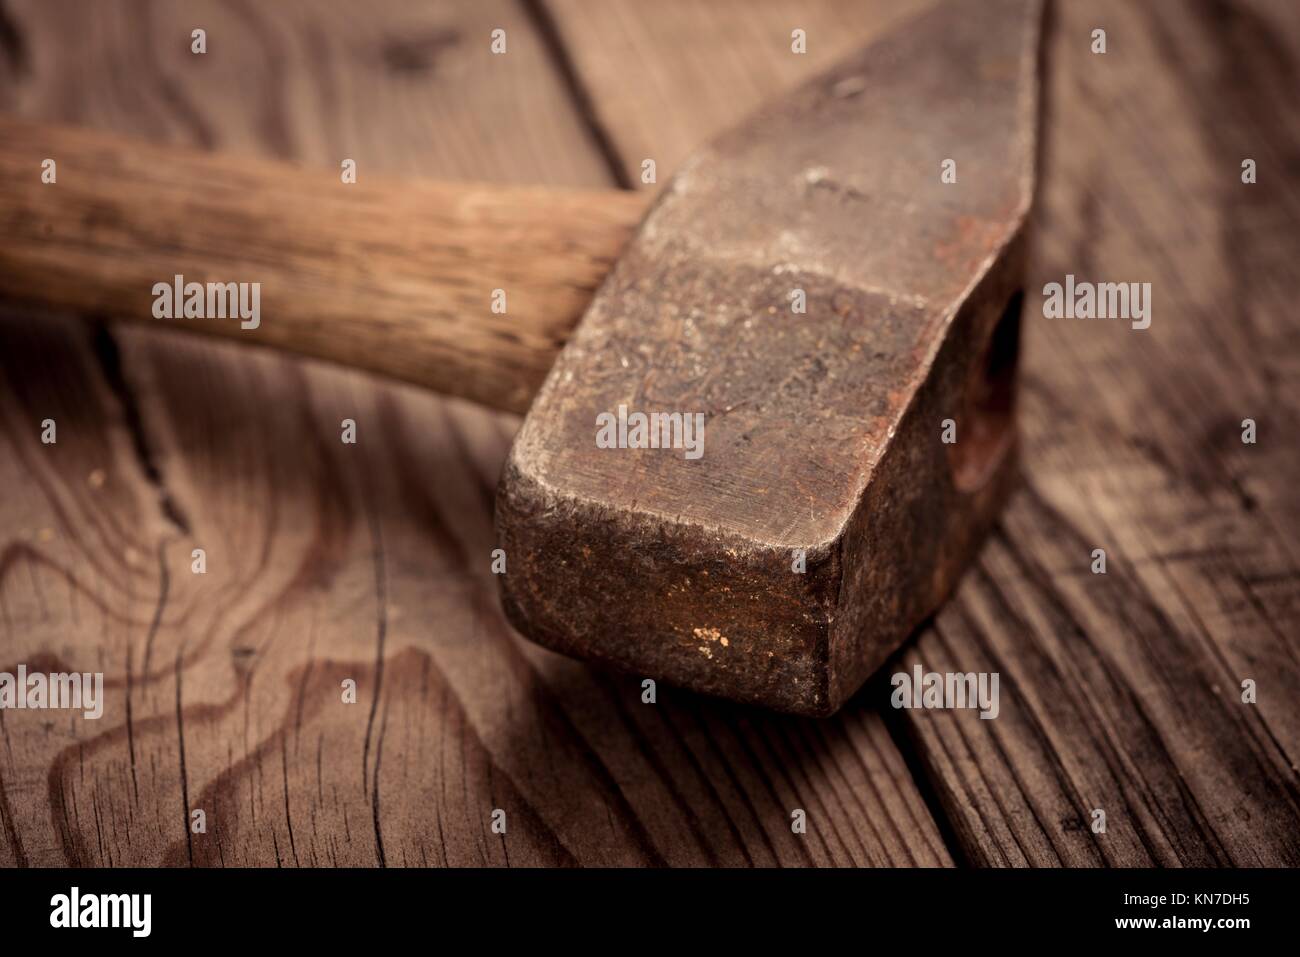 Vintage hammer lying on wooden surface of workbench. Conceptual image of home improvement, DIY and carpentry. Stock Photo